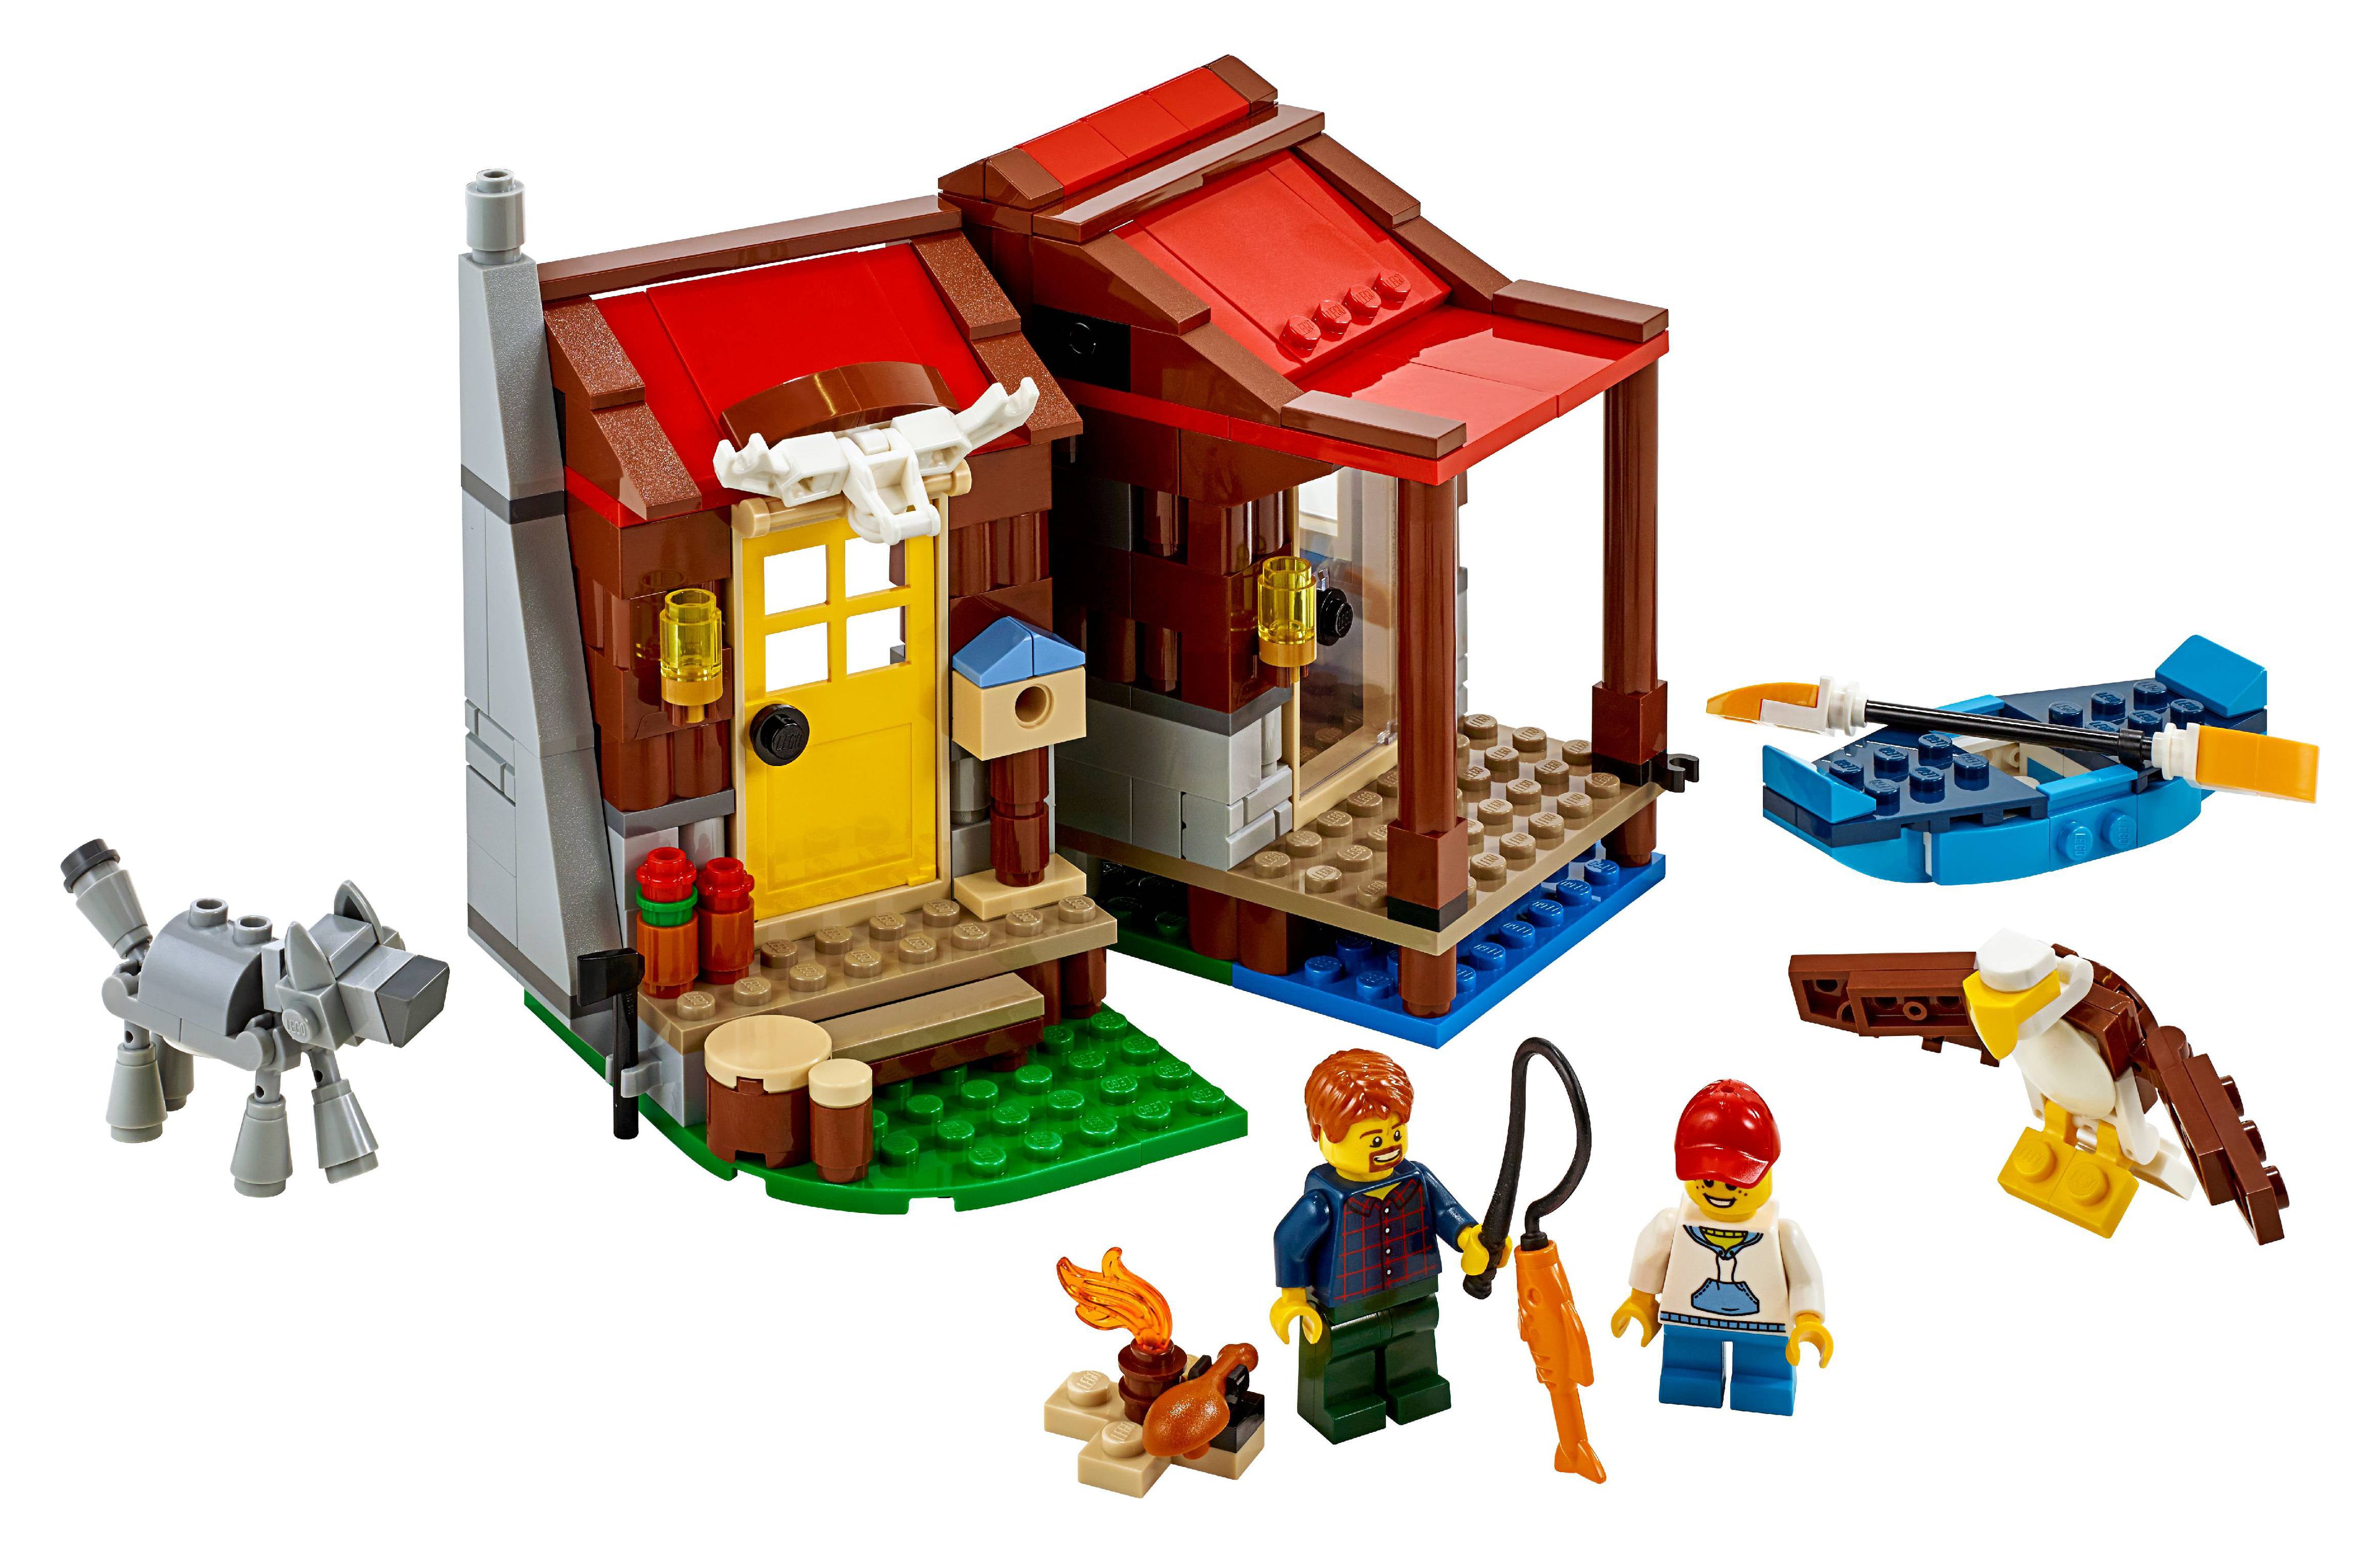 LEGO Creator Outback Cabin 31098 Toy Building Kit (305 Pieces) - image 3 of 8